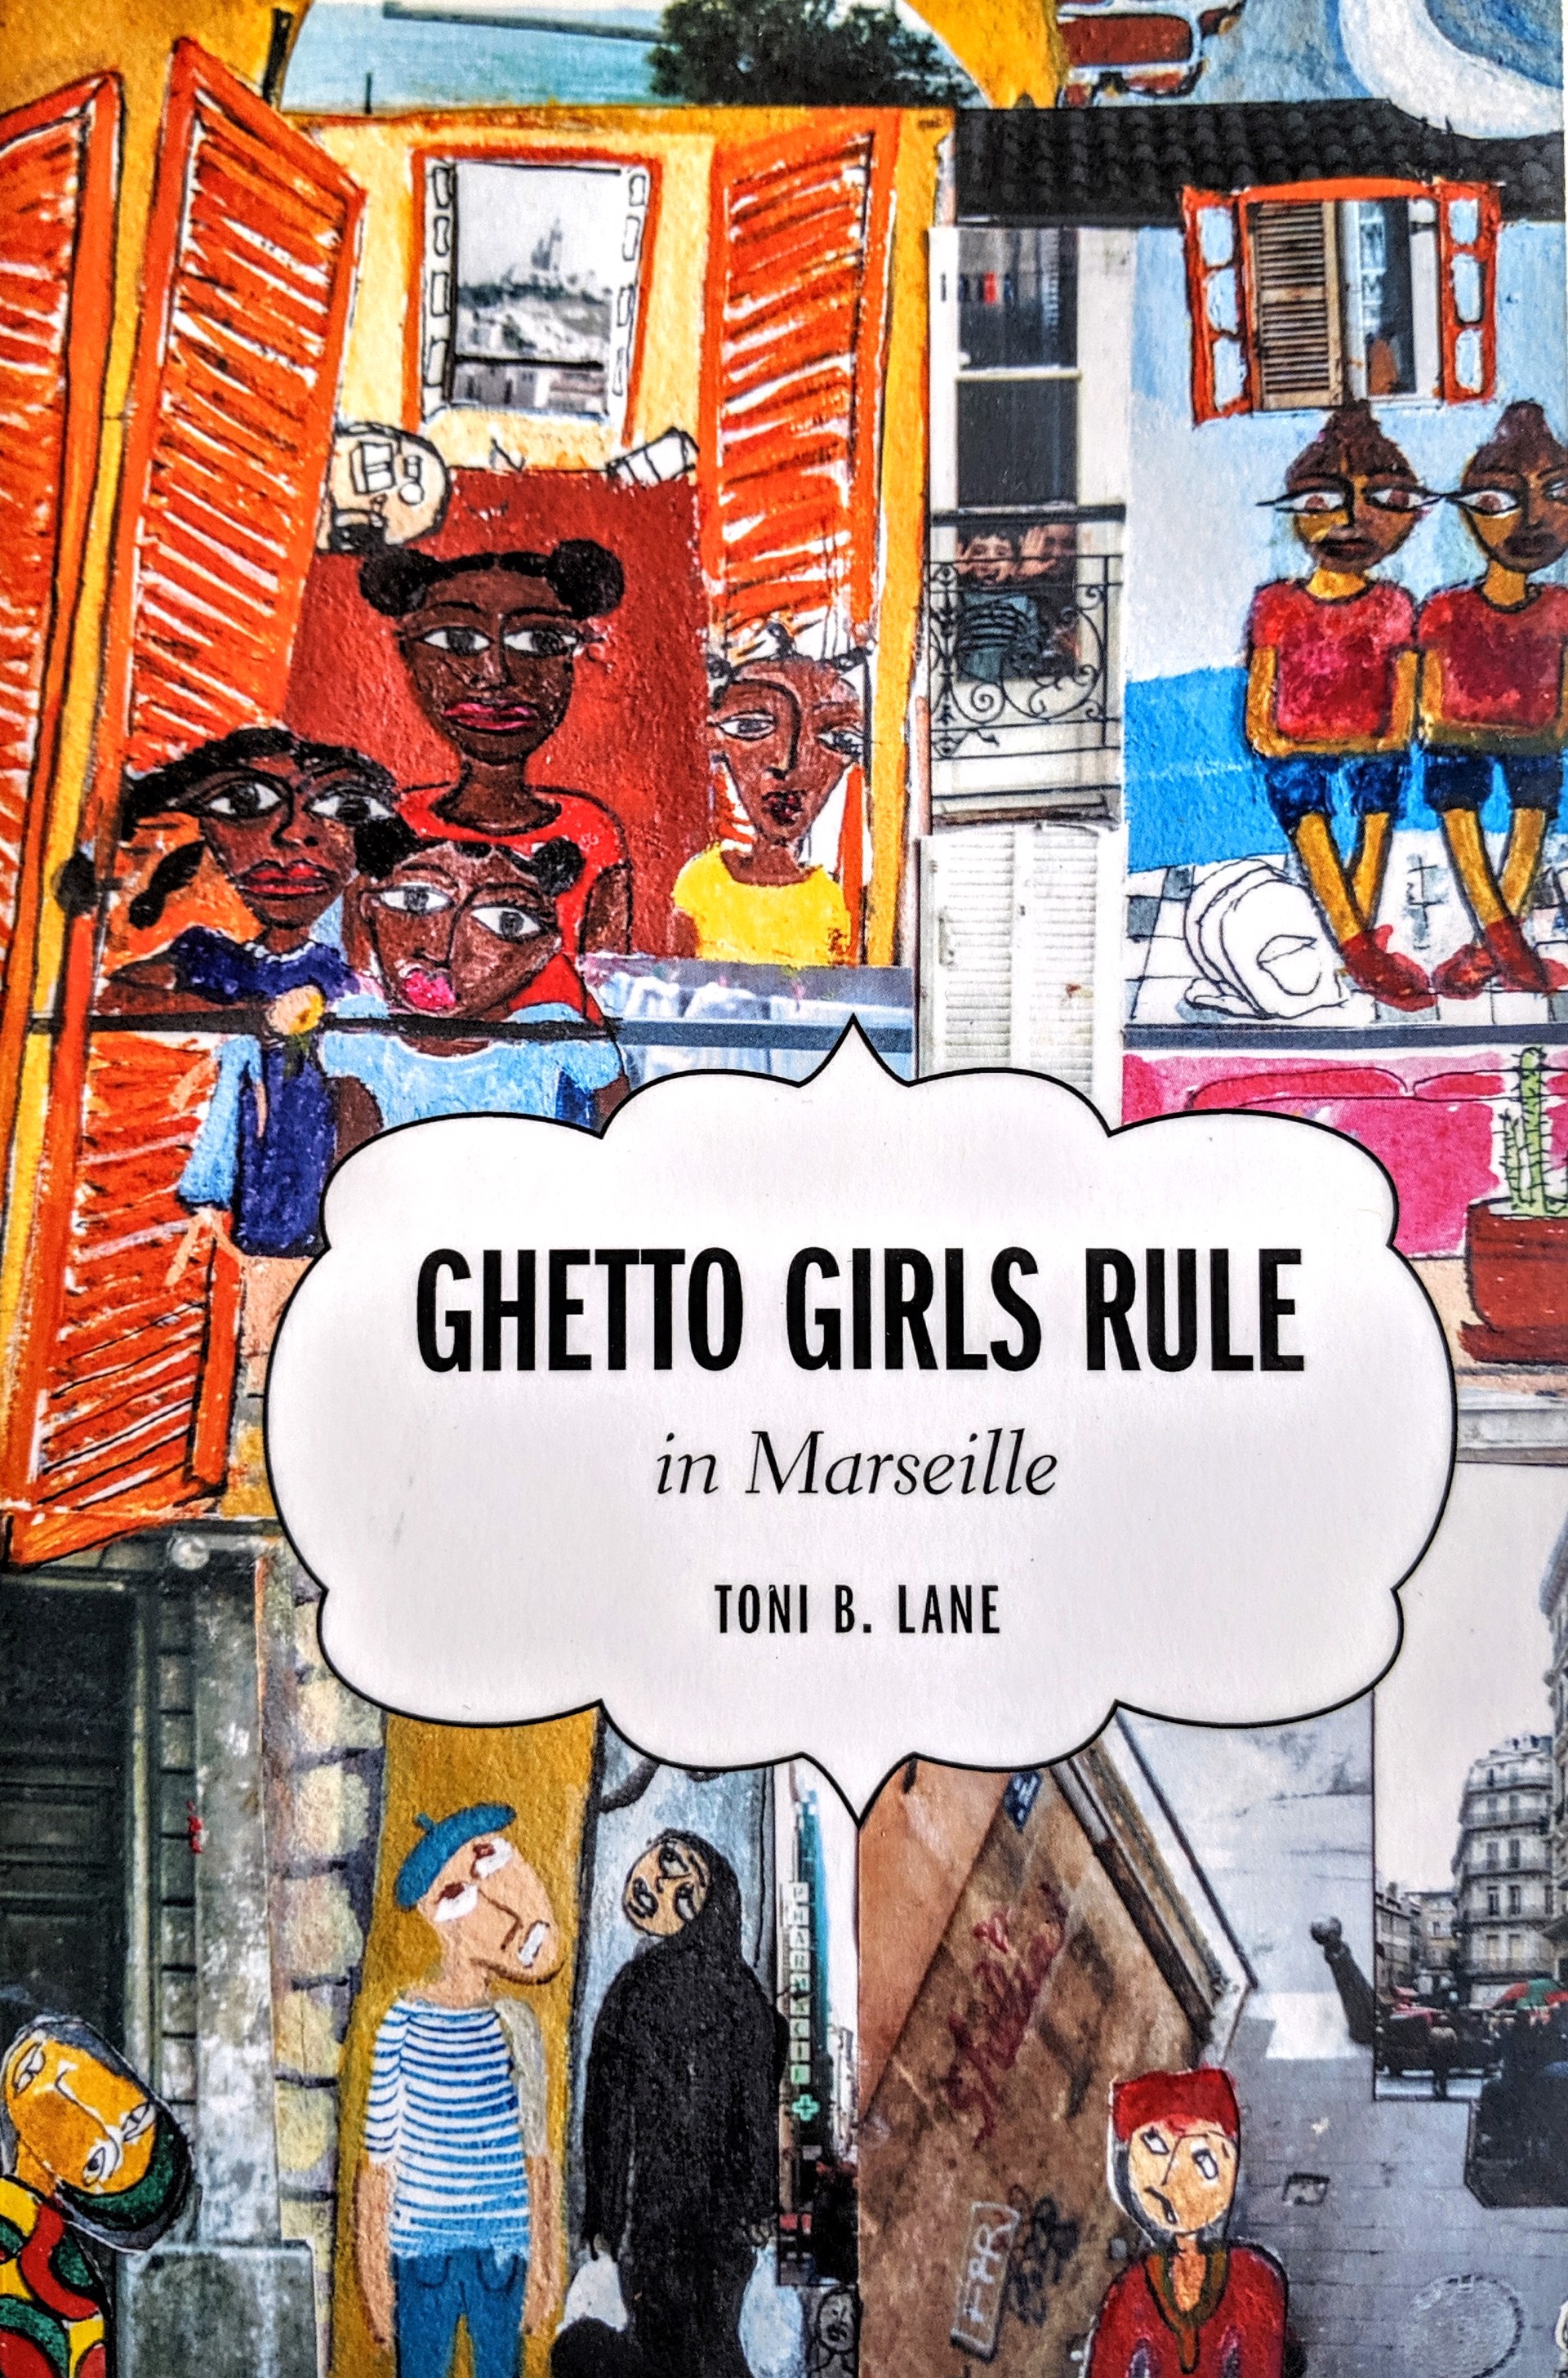 Ghetto Girls Rule in Marseille by Toni Lane